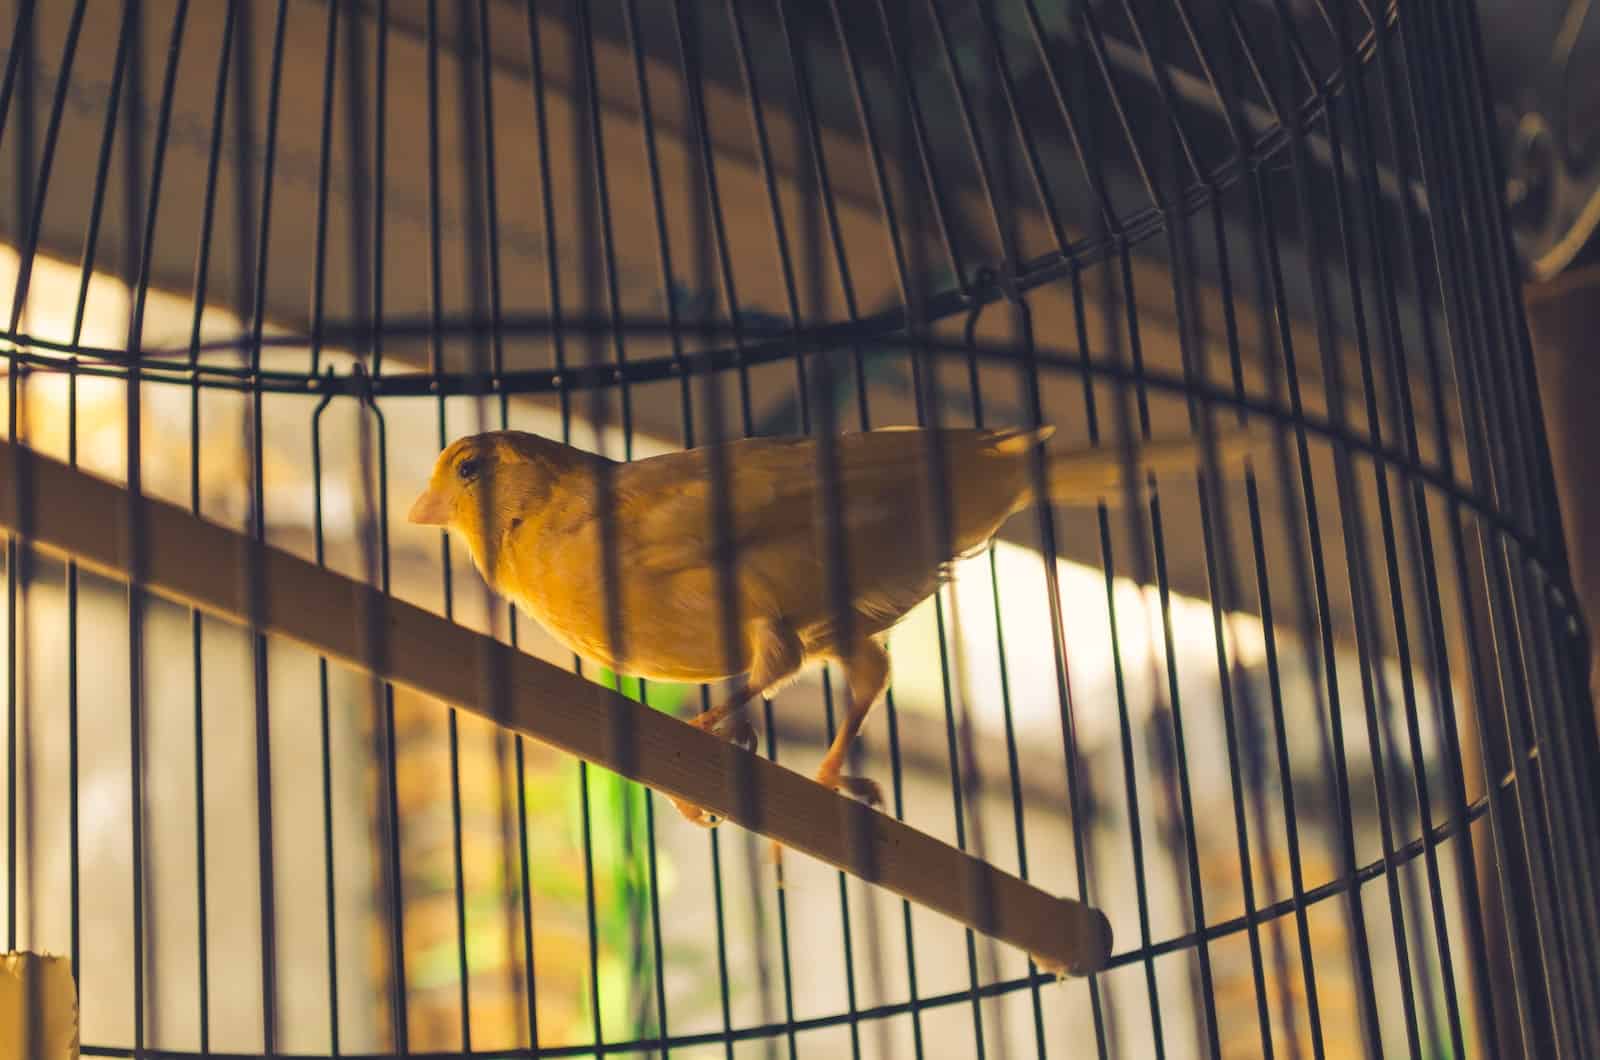 Canary Reproduction Issues